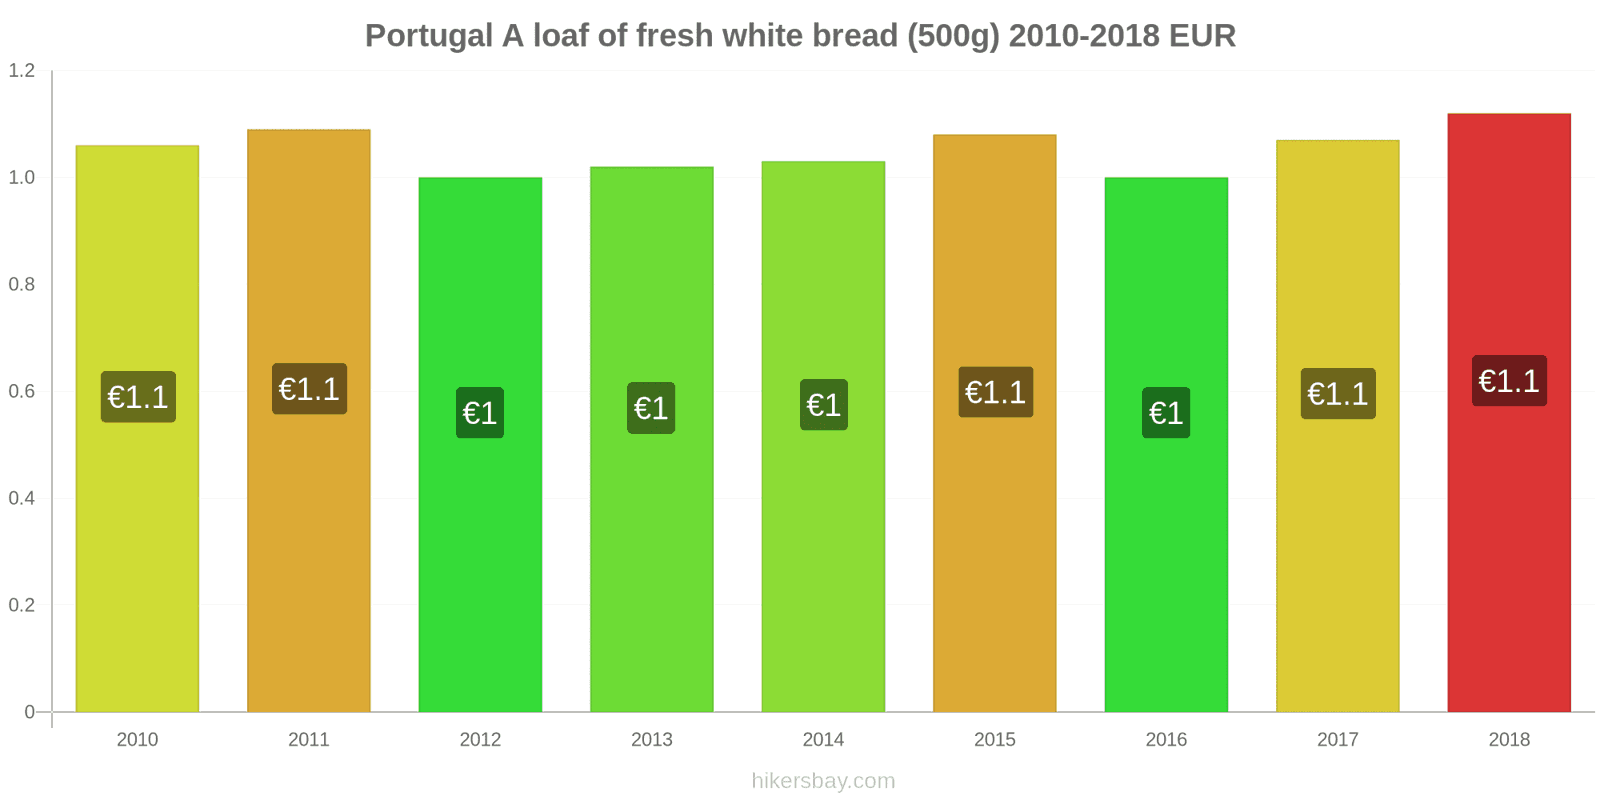 Portugal price changes A loaf of fresh white bread (500g) hikersbay.com